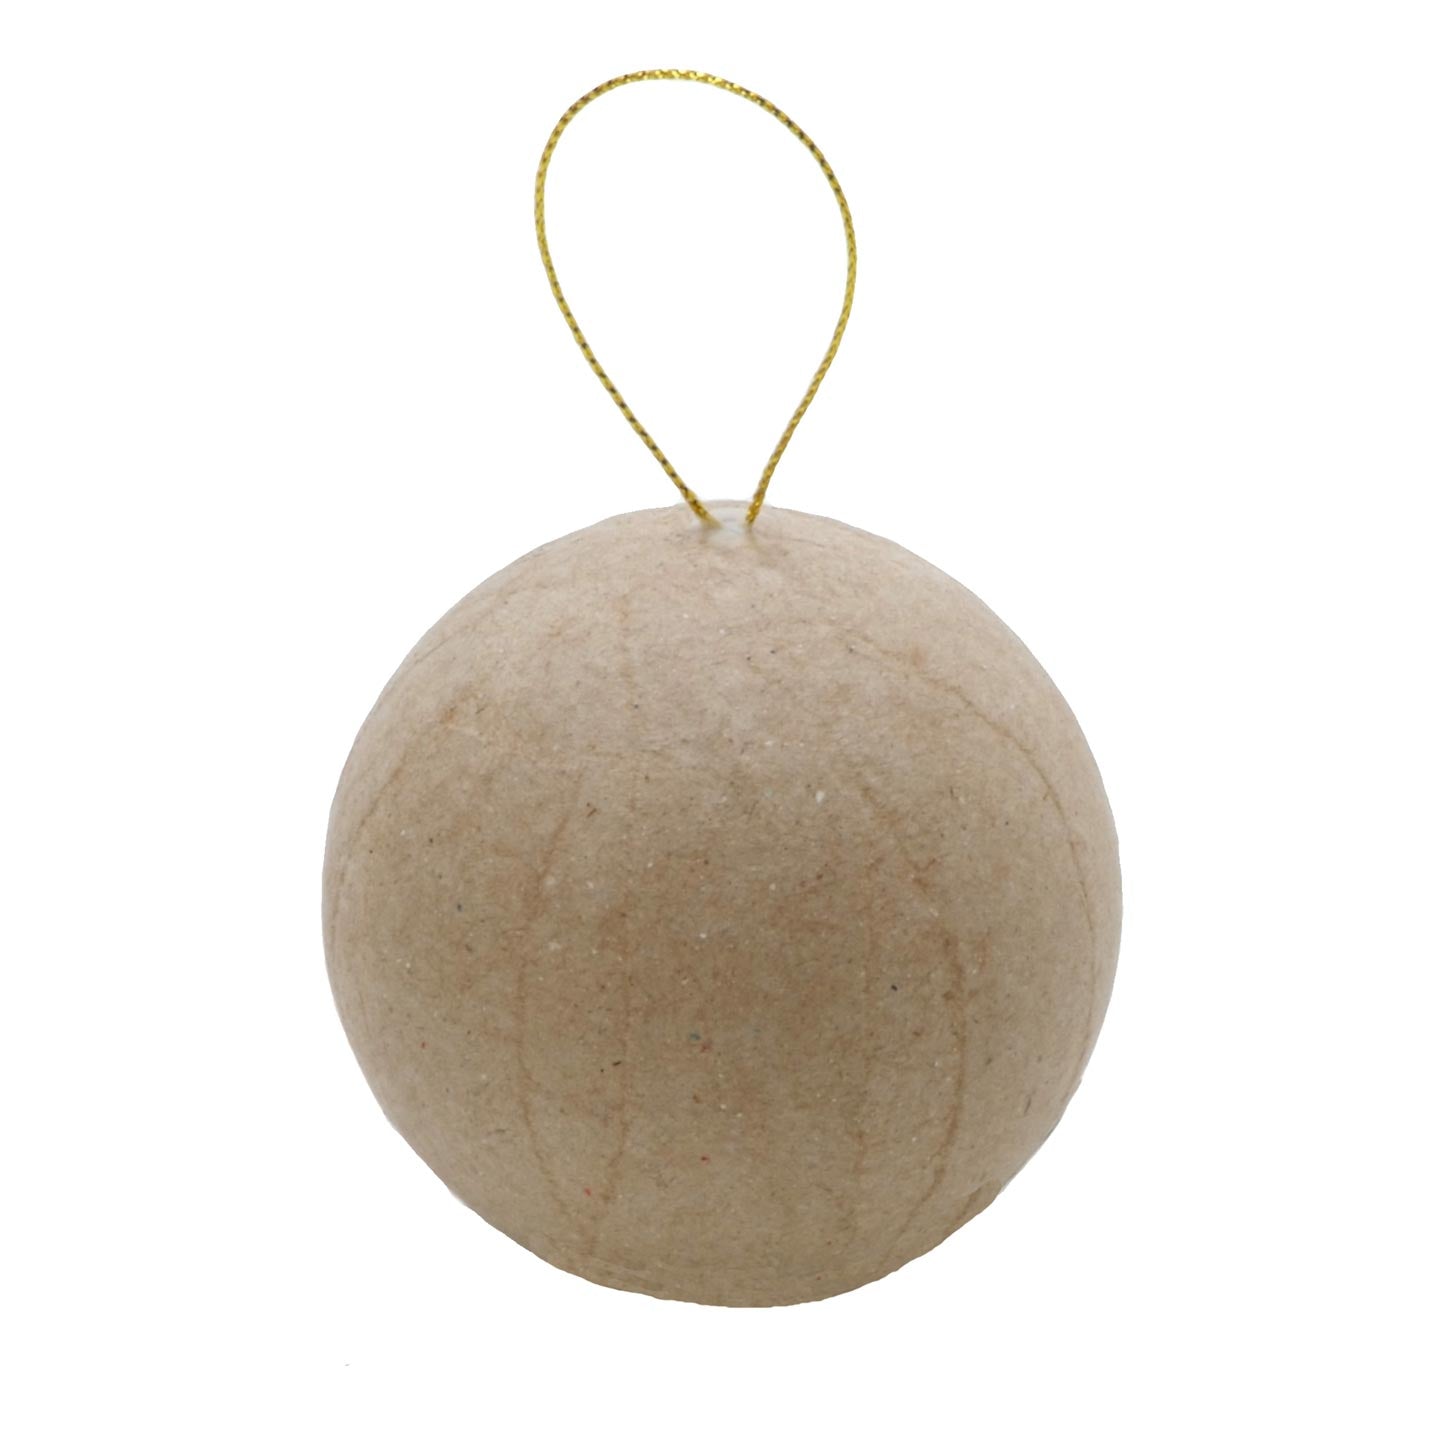 Paper Mache Geometrical Shapes - Ball with String (2 in.) by Papier Mache - K. A. Artist Shop